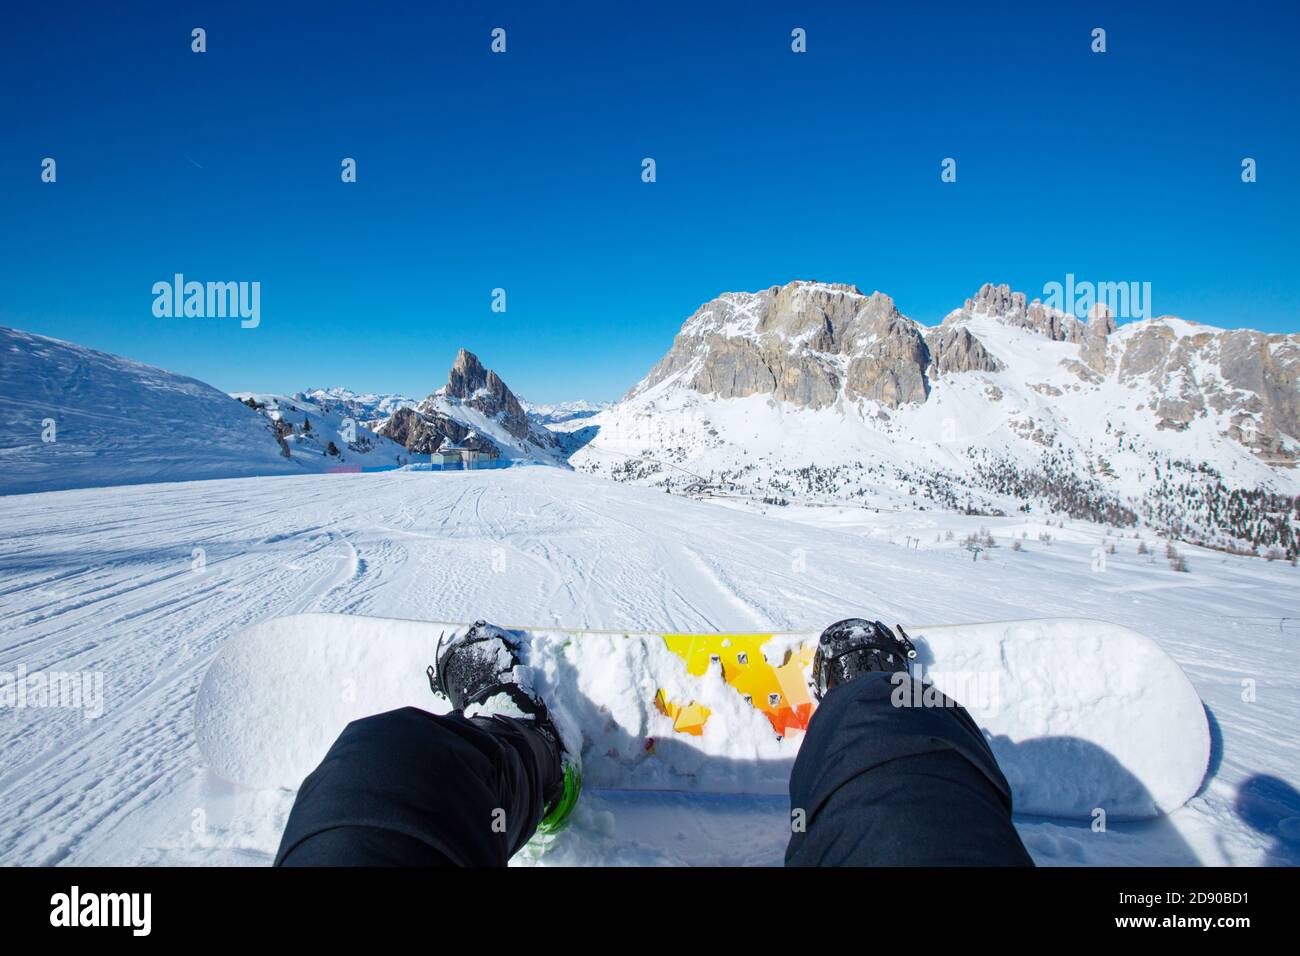 Snowboarder sitting on ski slope at resort in Dolomites Italian Alps view on legs and snowboard Stock Photo